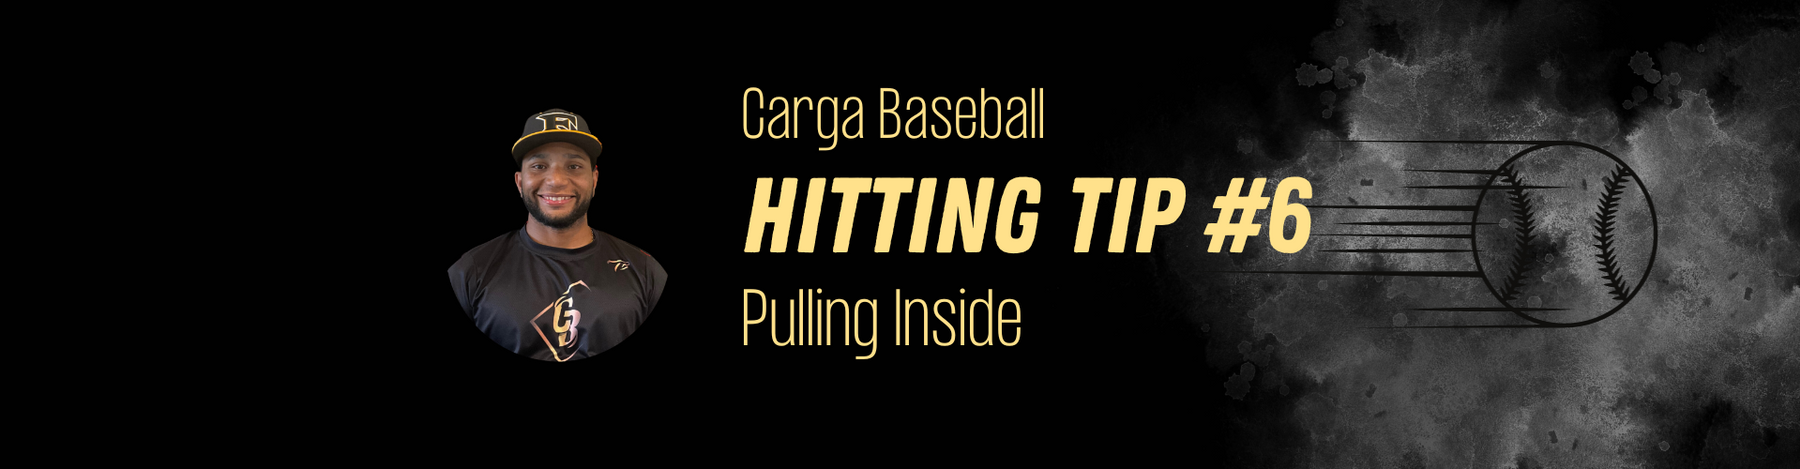 Hitting Tips from Carlos: #6 Pulling Inside